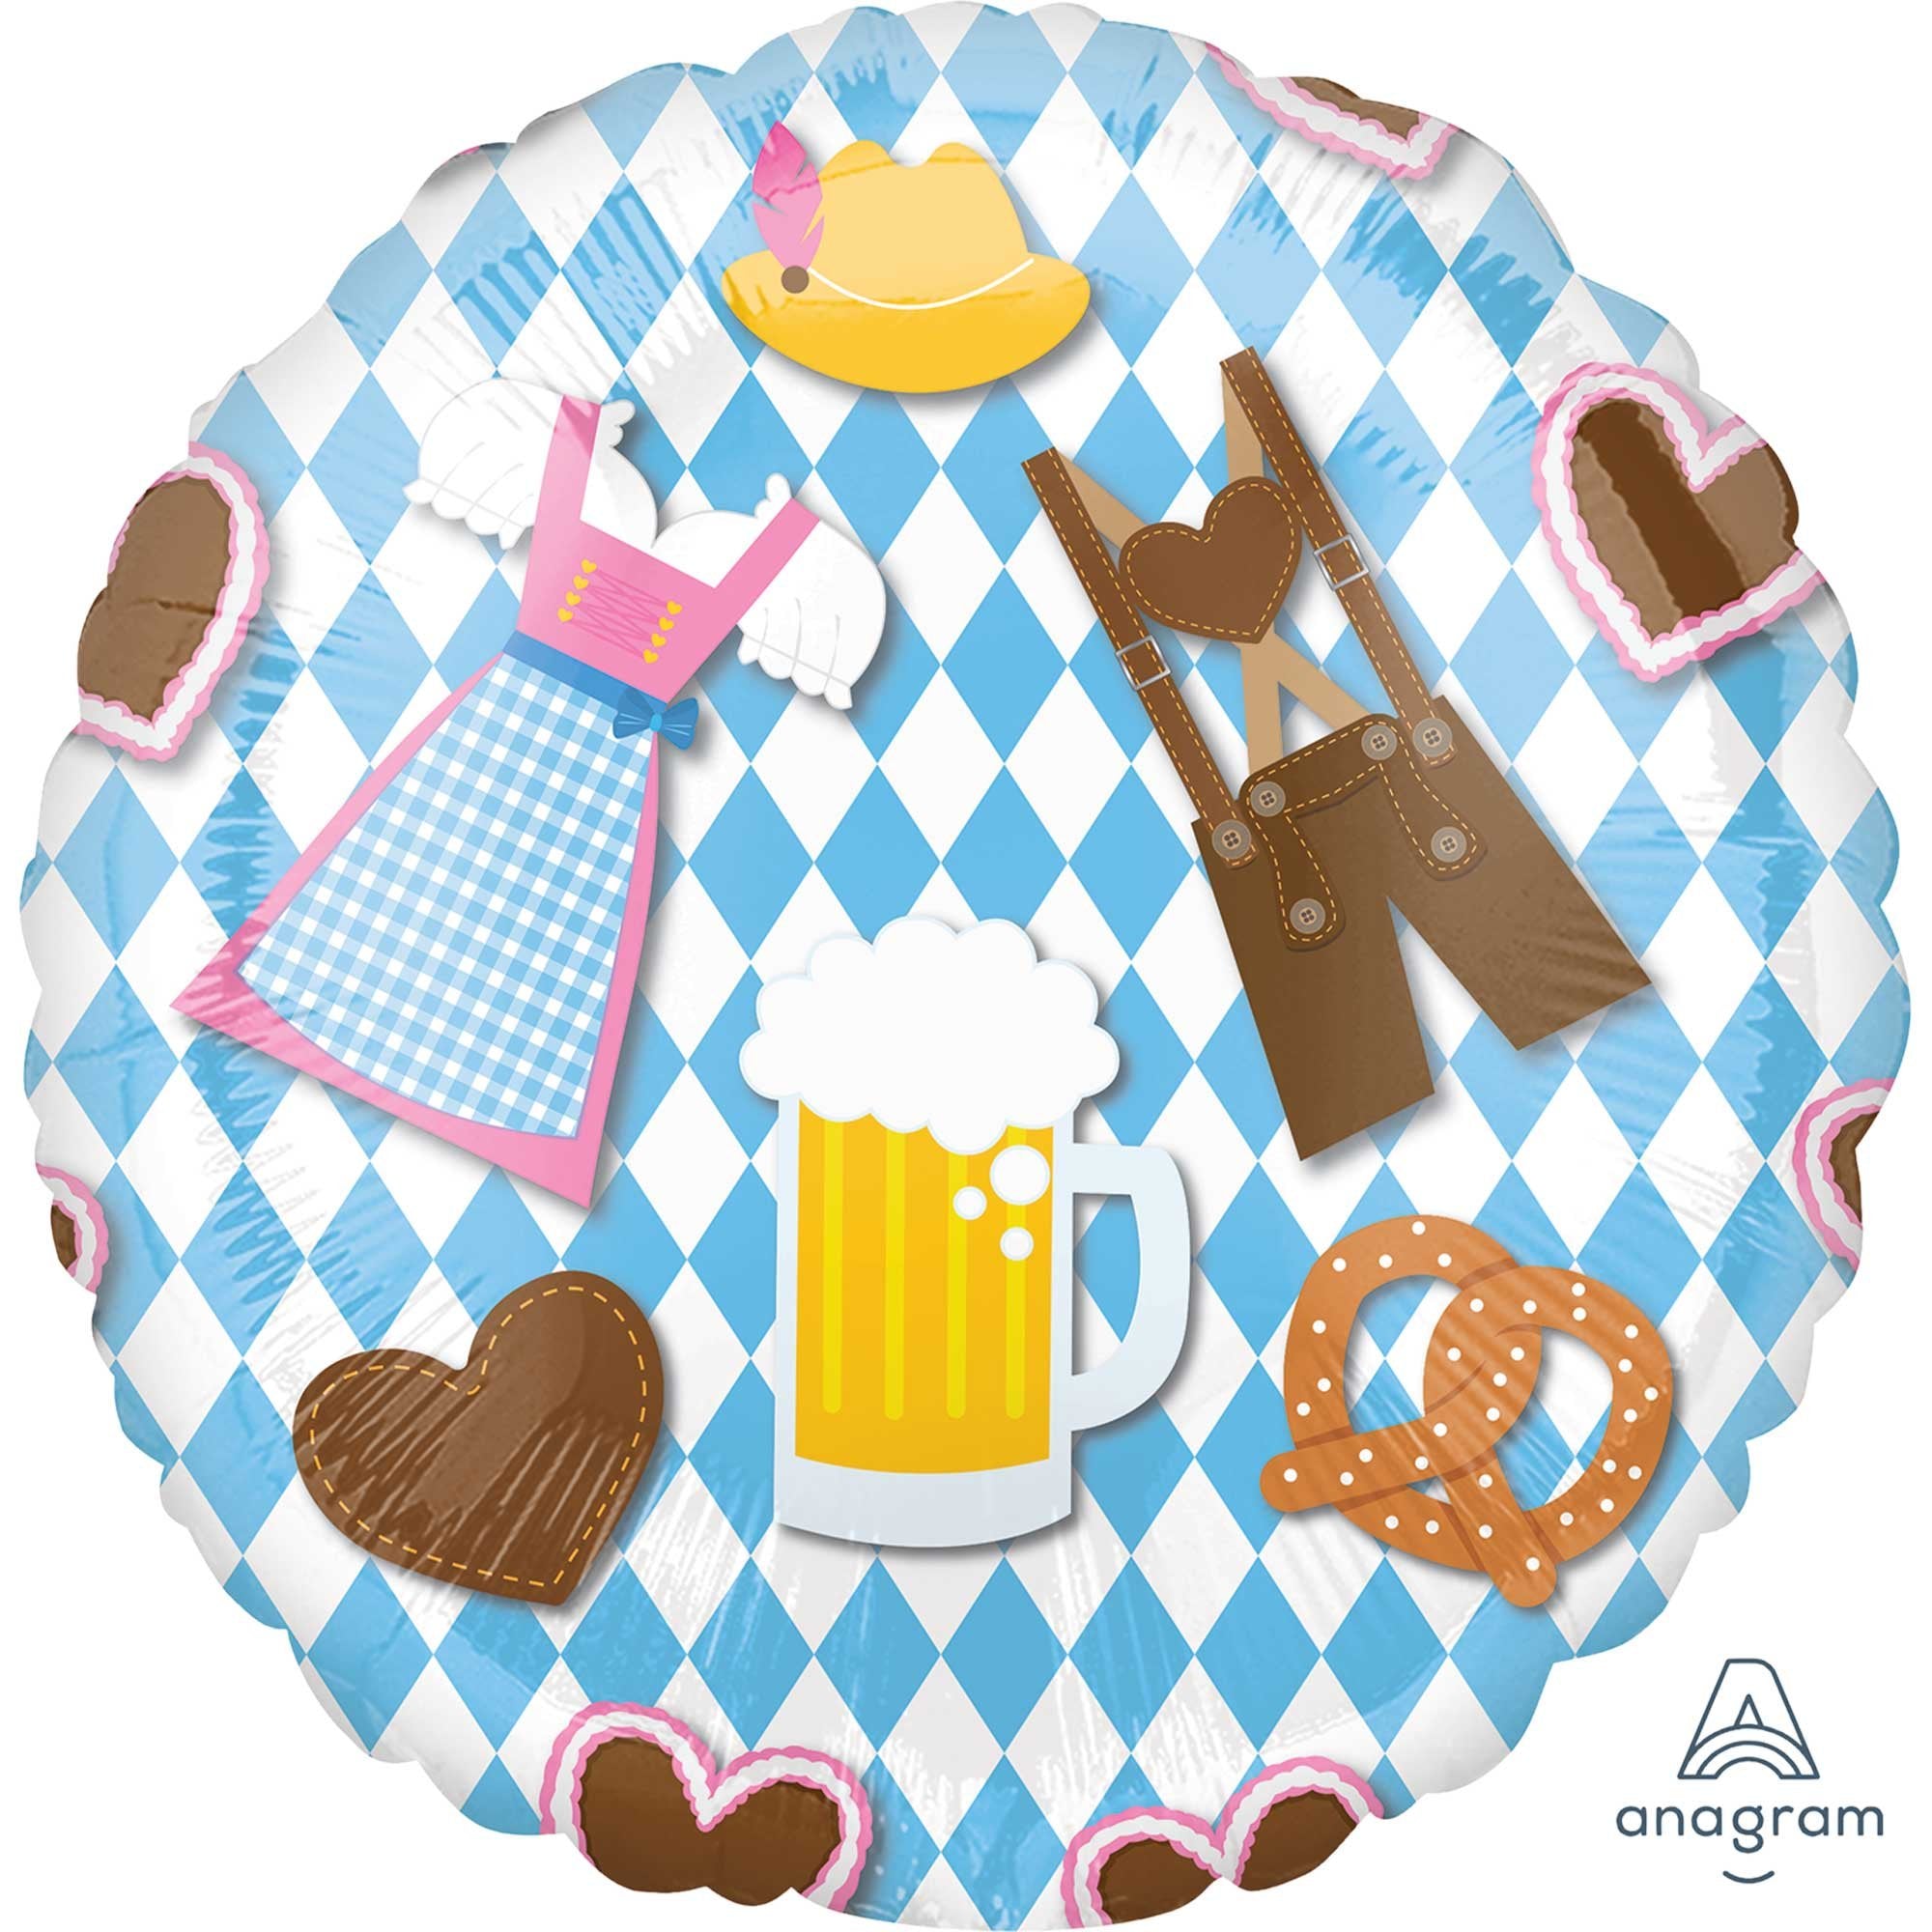 Celebrate Oktoberfest in style with Party Empress' comprehensive Oktoberfest Party Decor Collection.